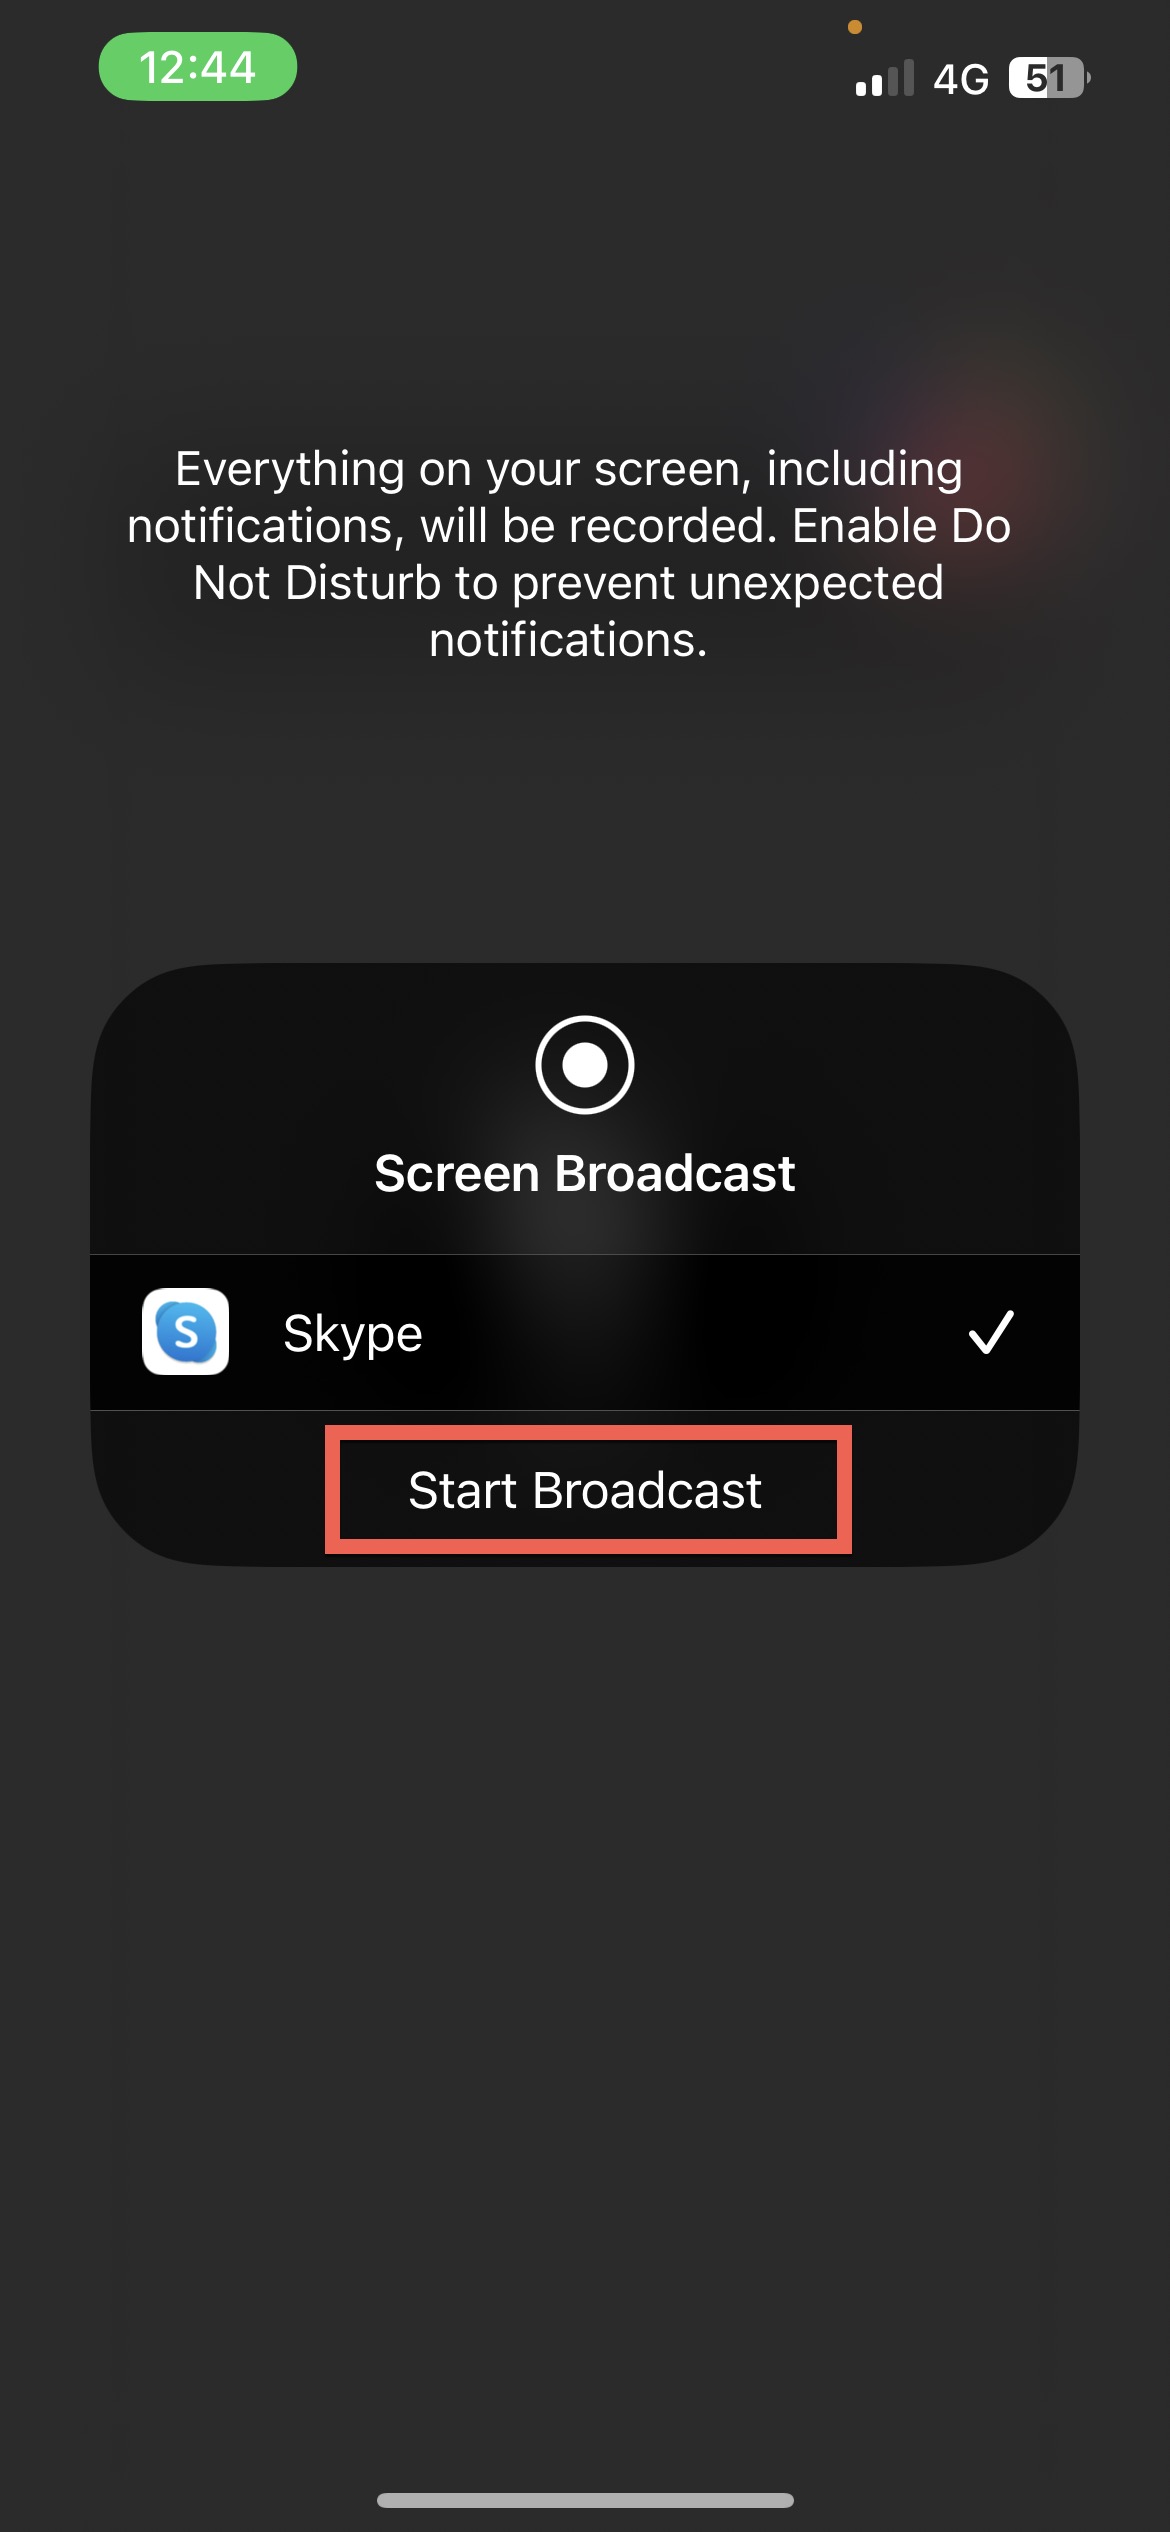 Tap on the Start Broadcast button in Skype